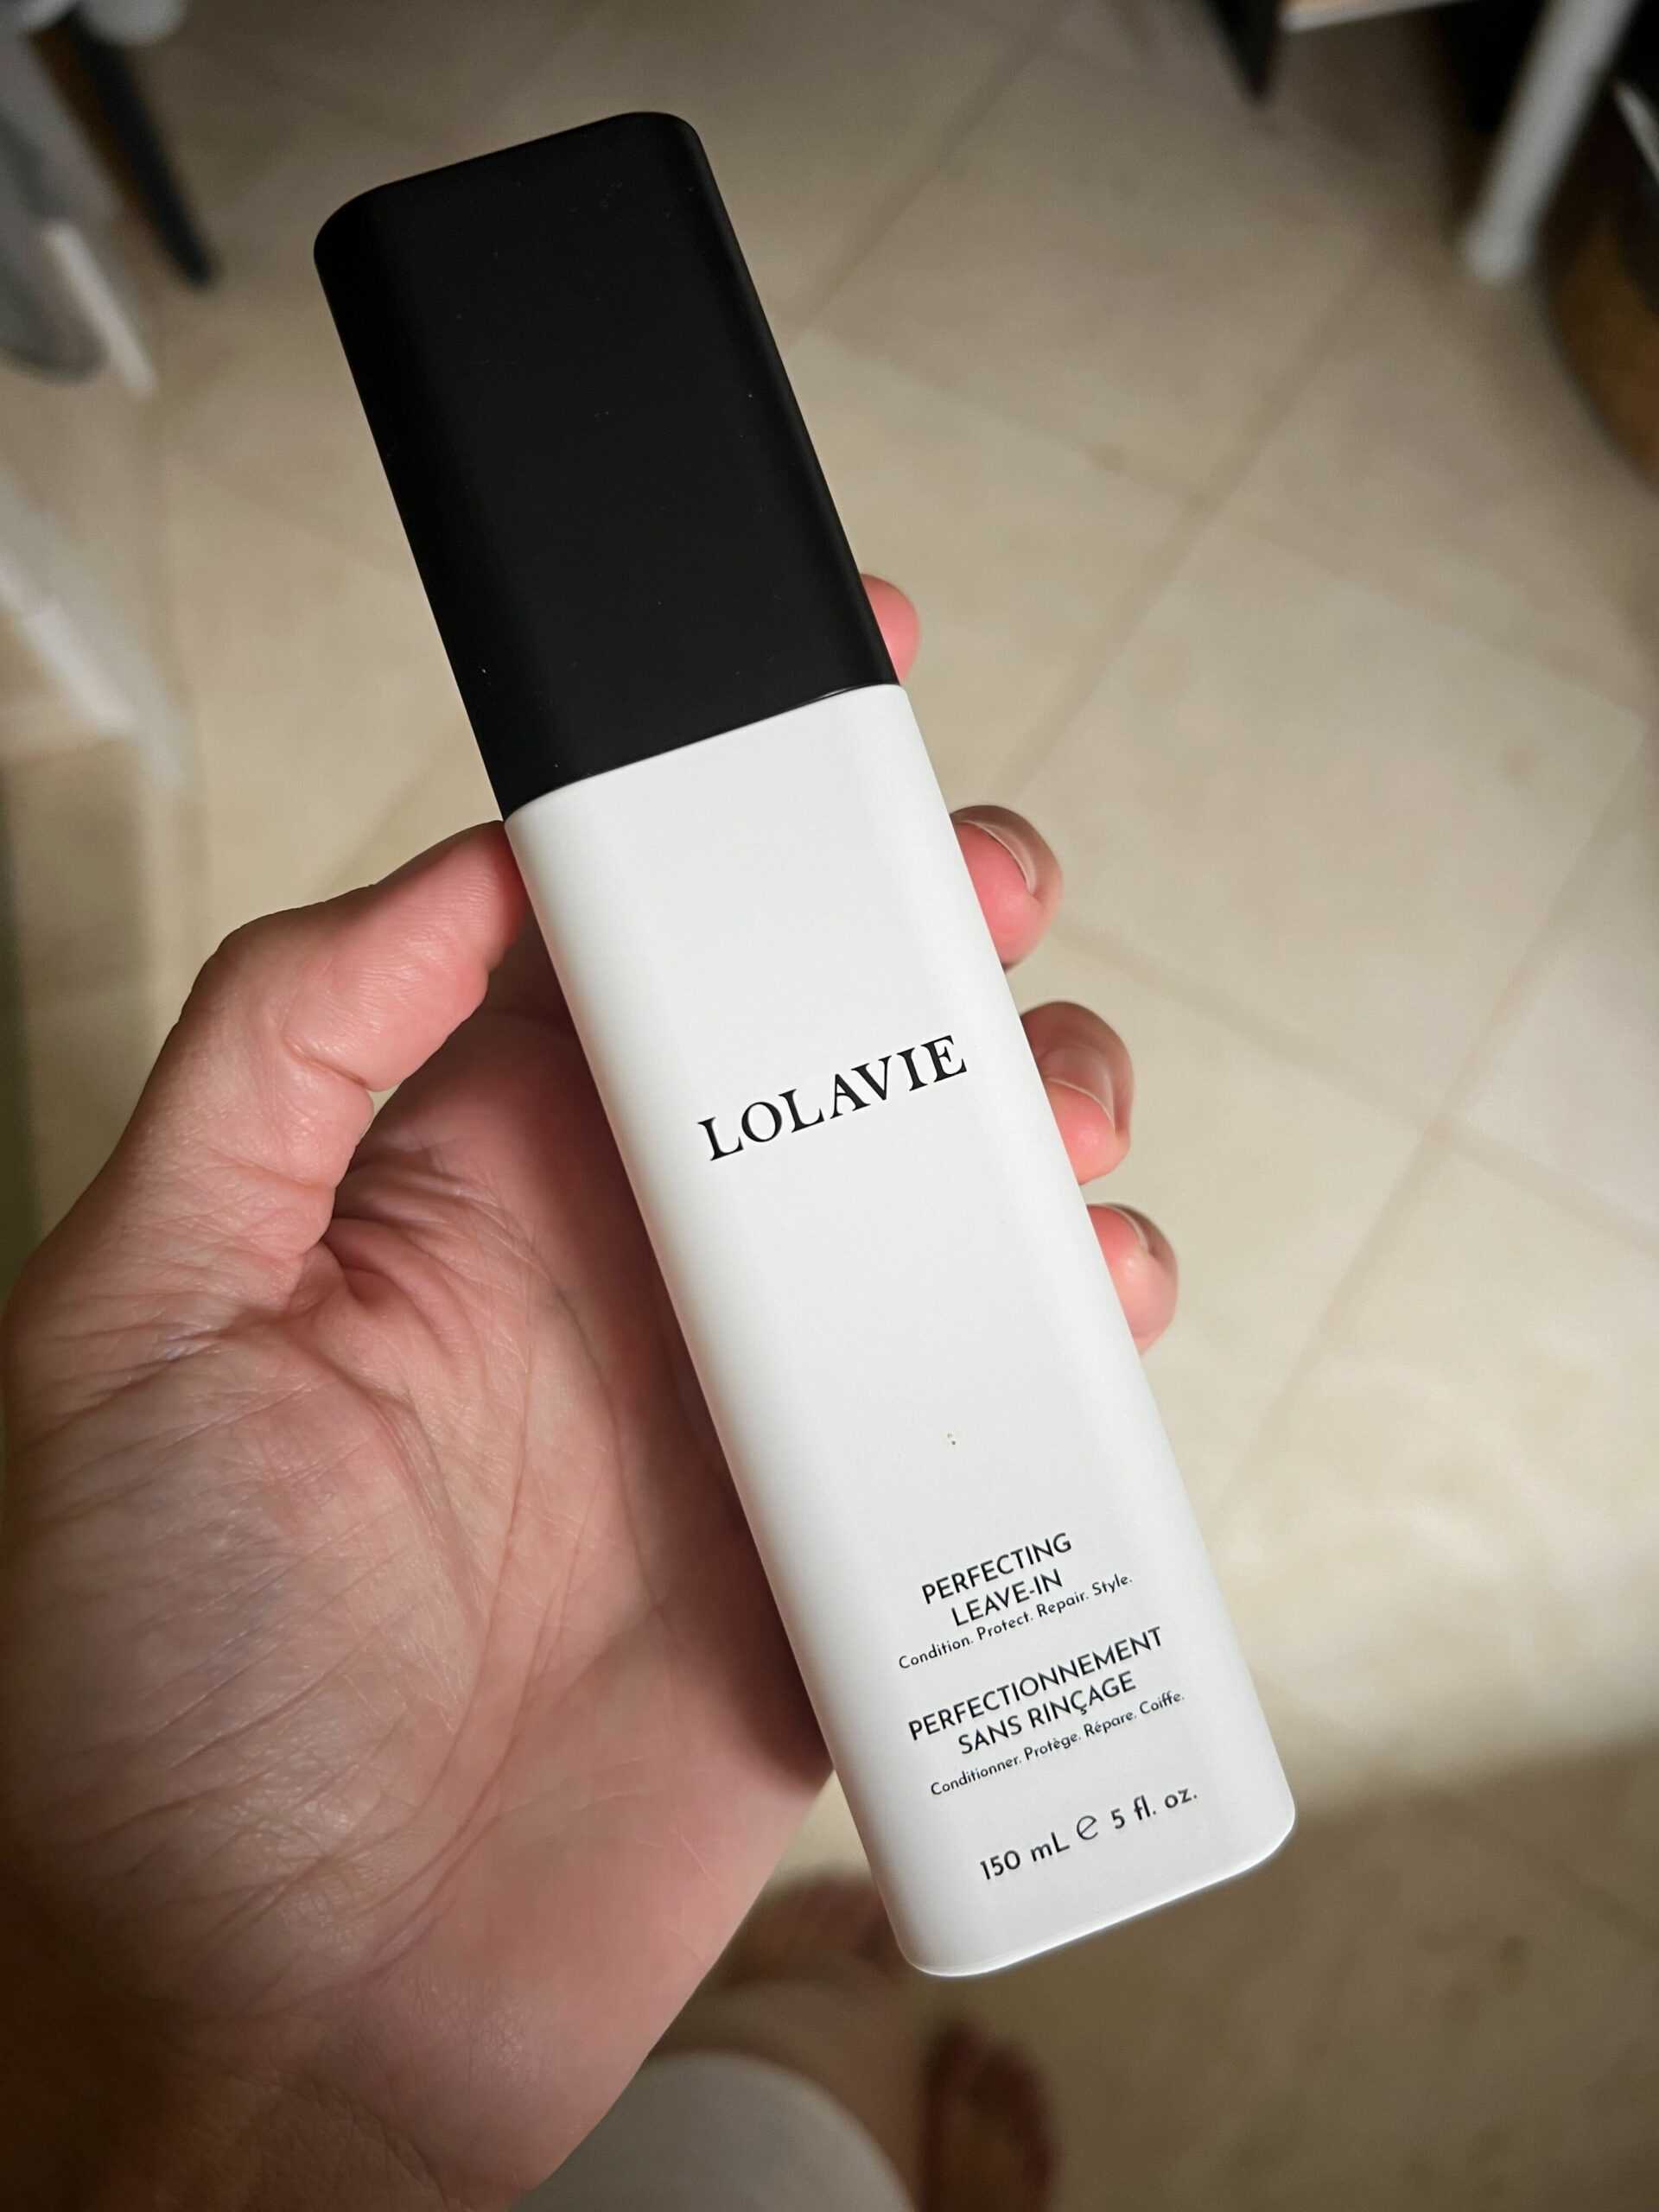 A bottle of LolaVie's Perfecting Leave-In in a woman's hand.